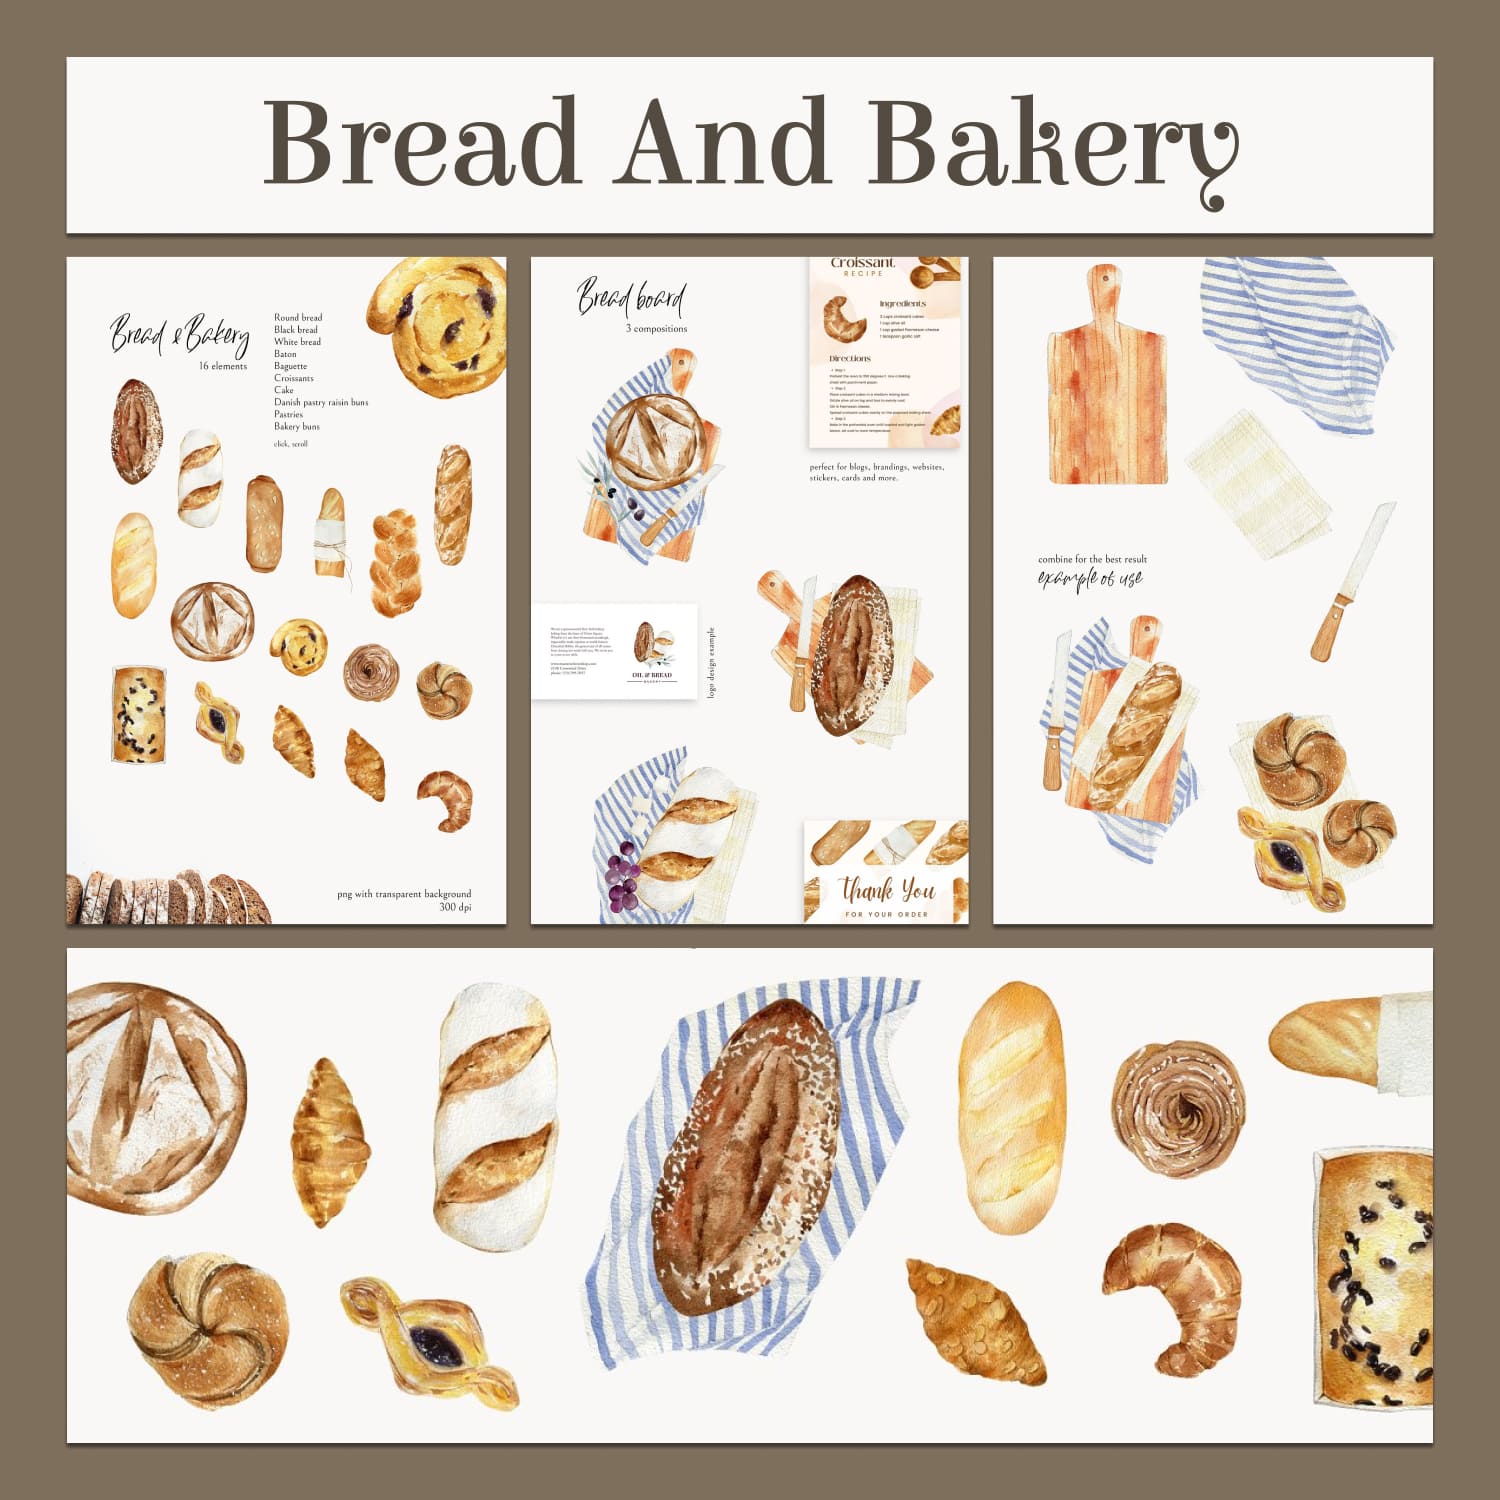 Bread and bakery. watercolor food - main image preview.